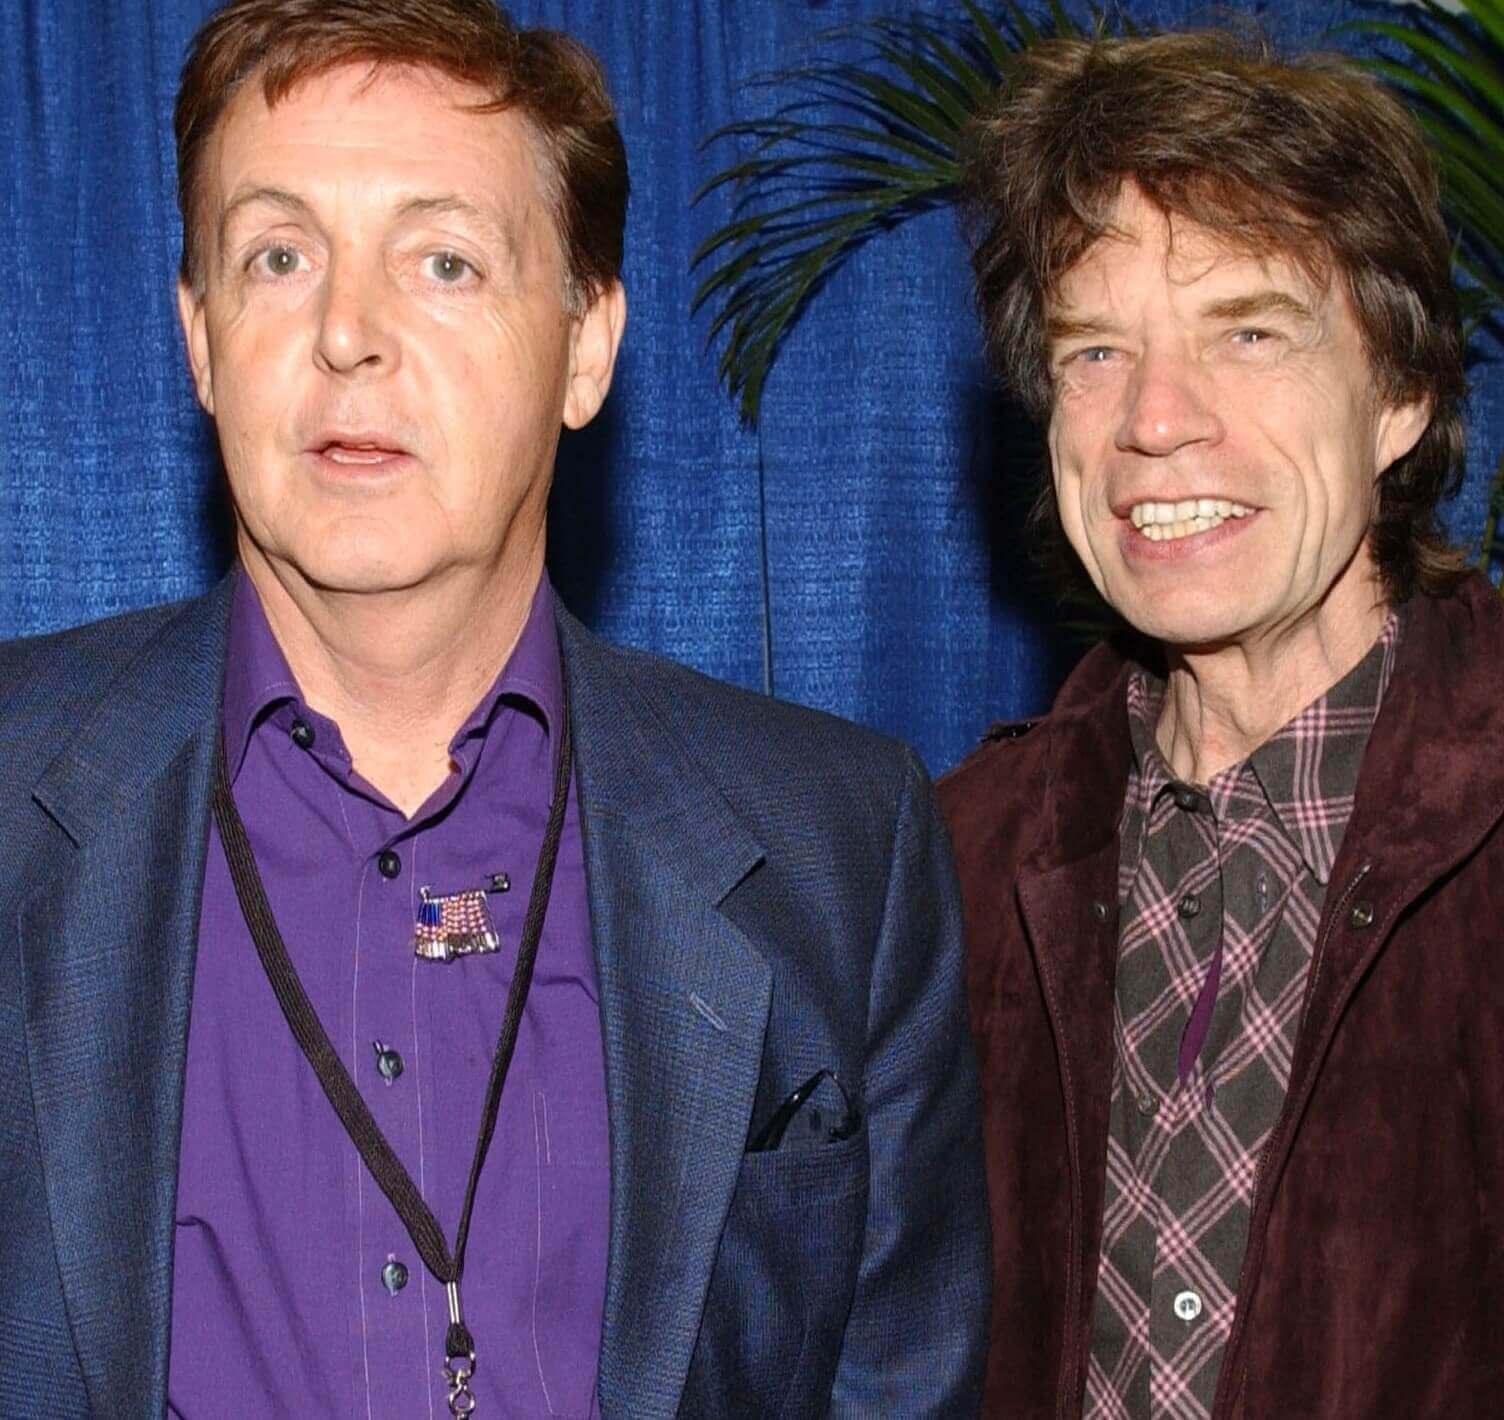 Paul McCartney and Mick Jagger wearing suits